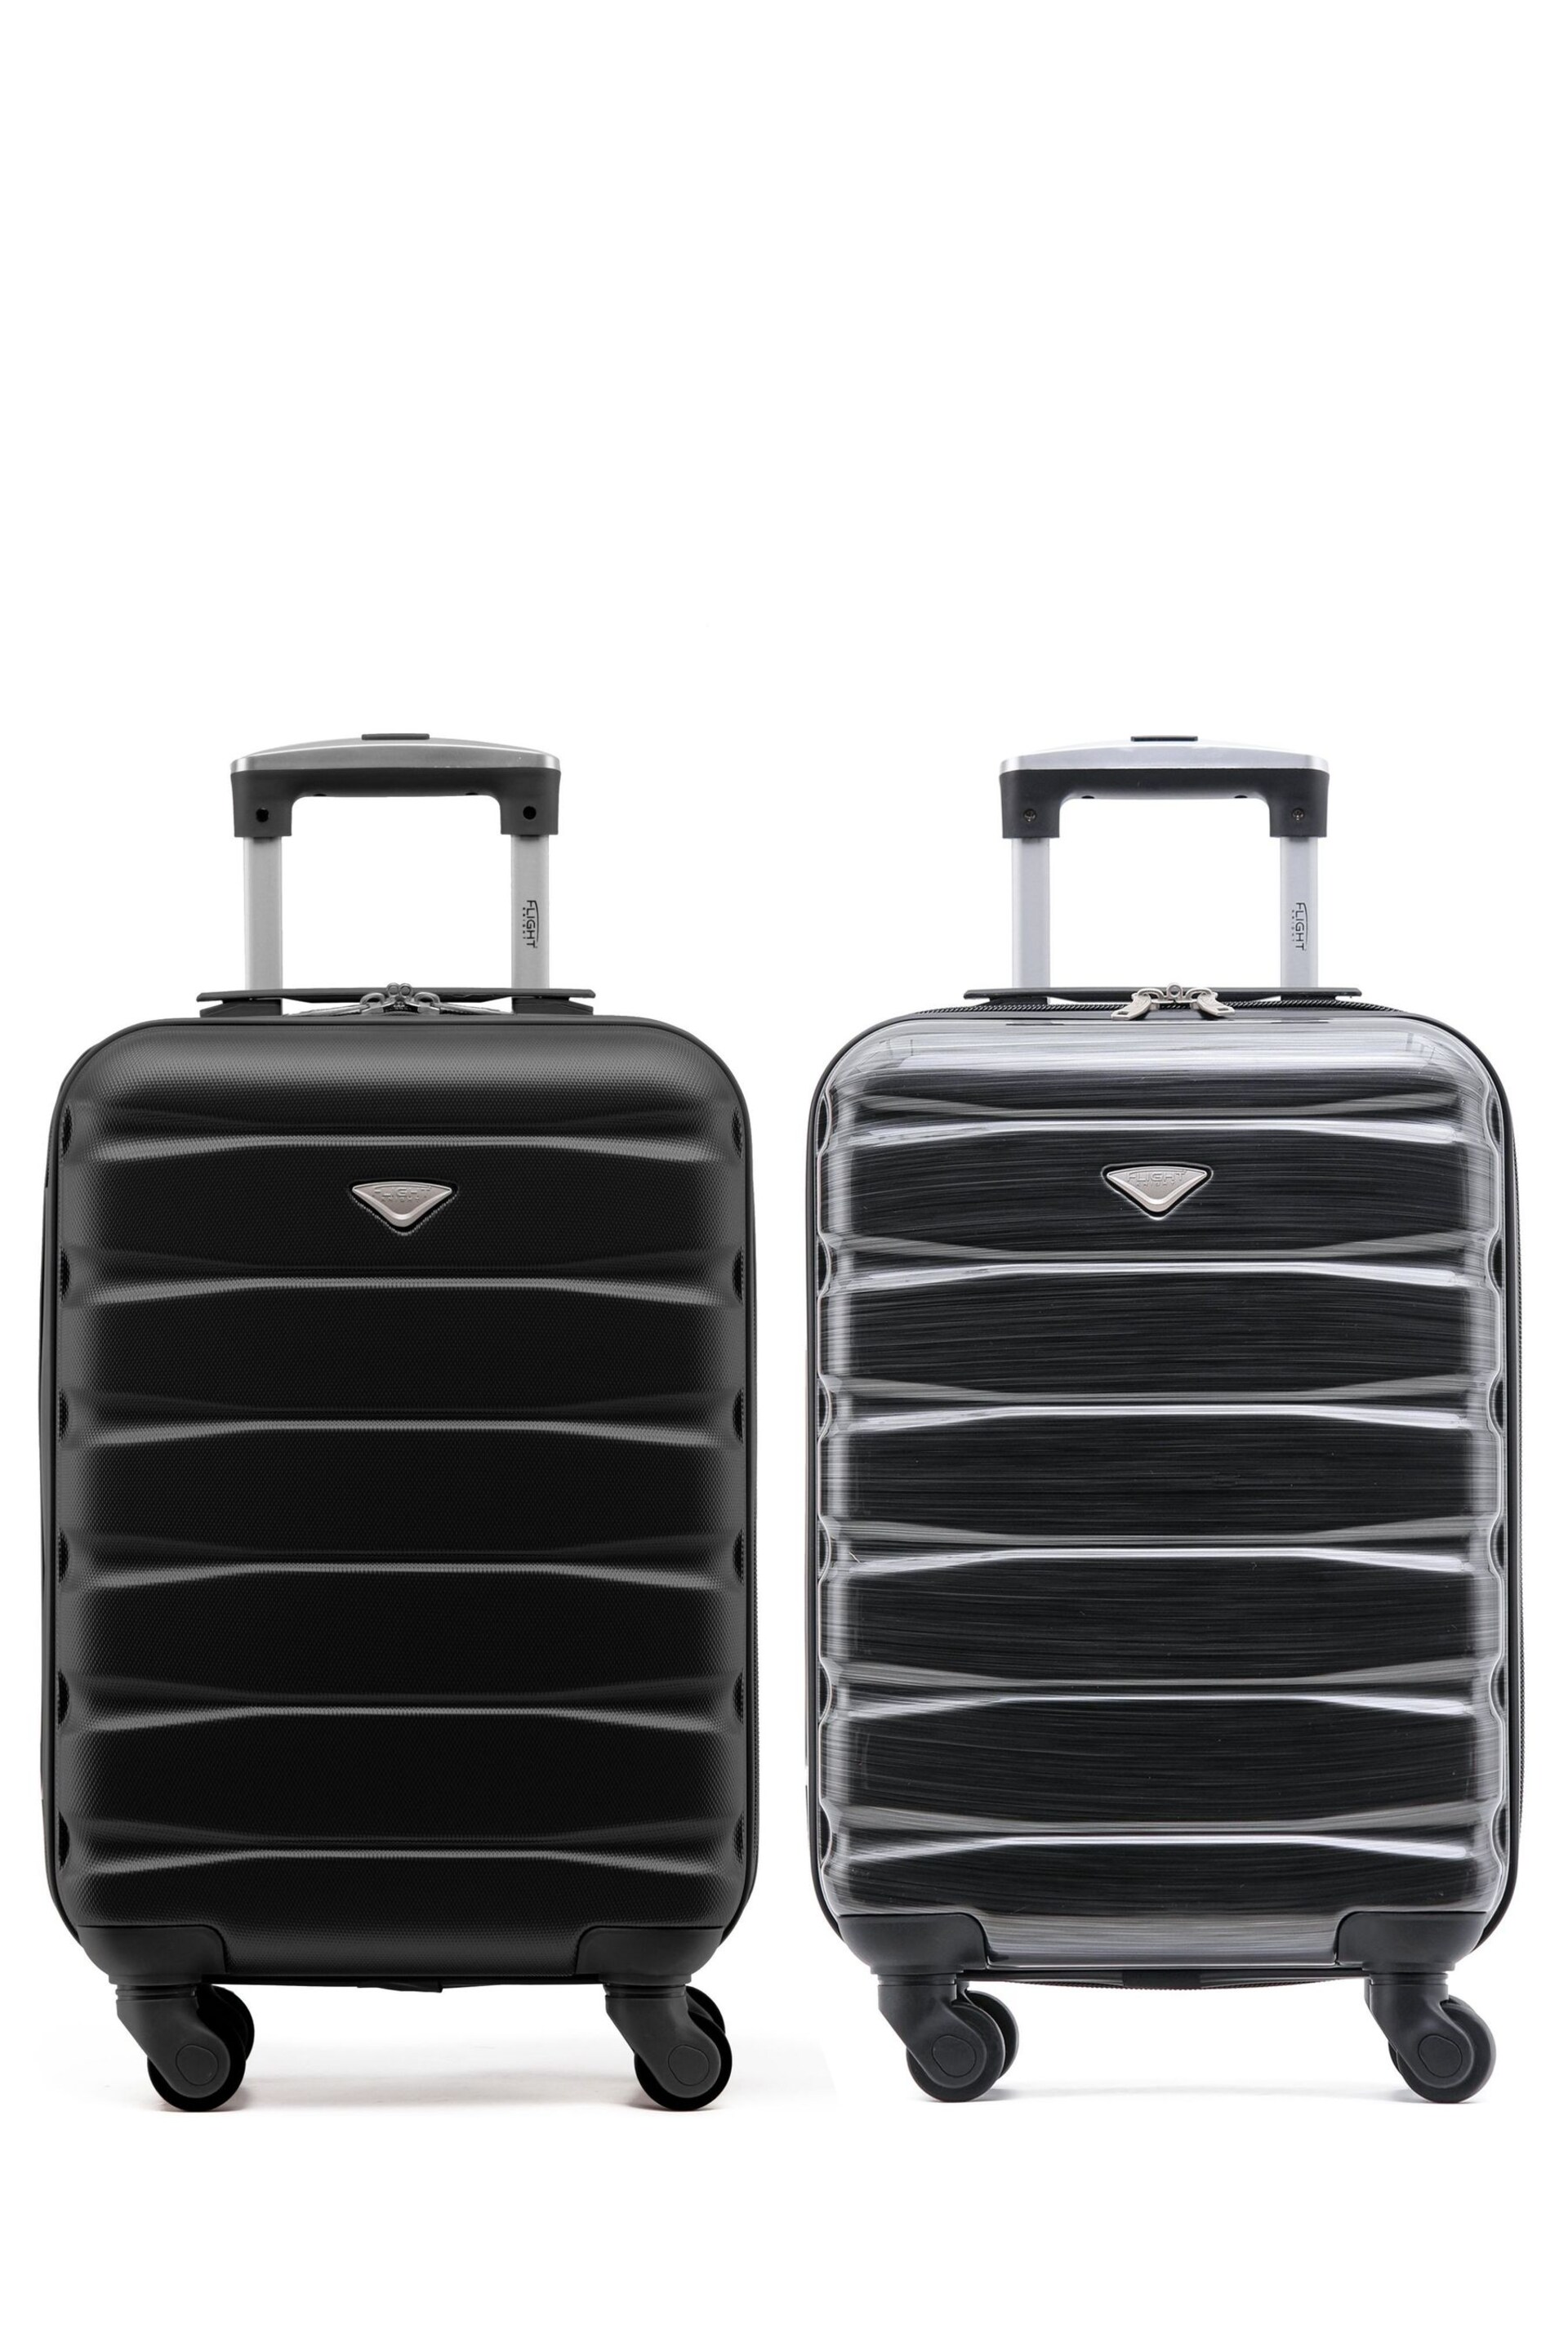 Flight Knight EasyJet Overhead 55x35x20cm Hard Shell Cabin Carry On Case Suitcase Set Of 2 - Image 1 of 9